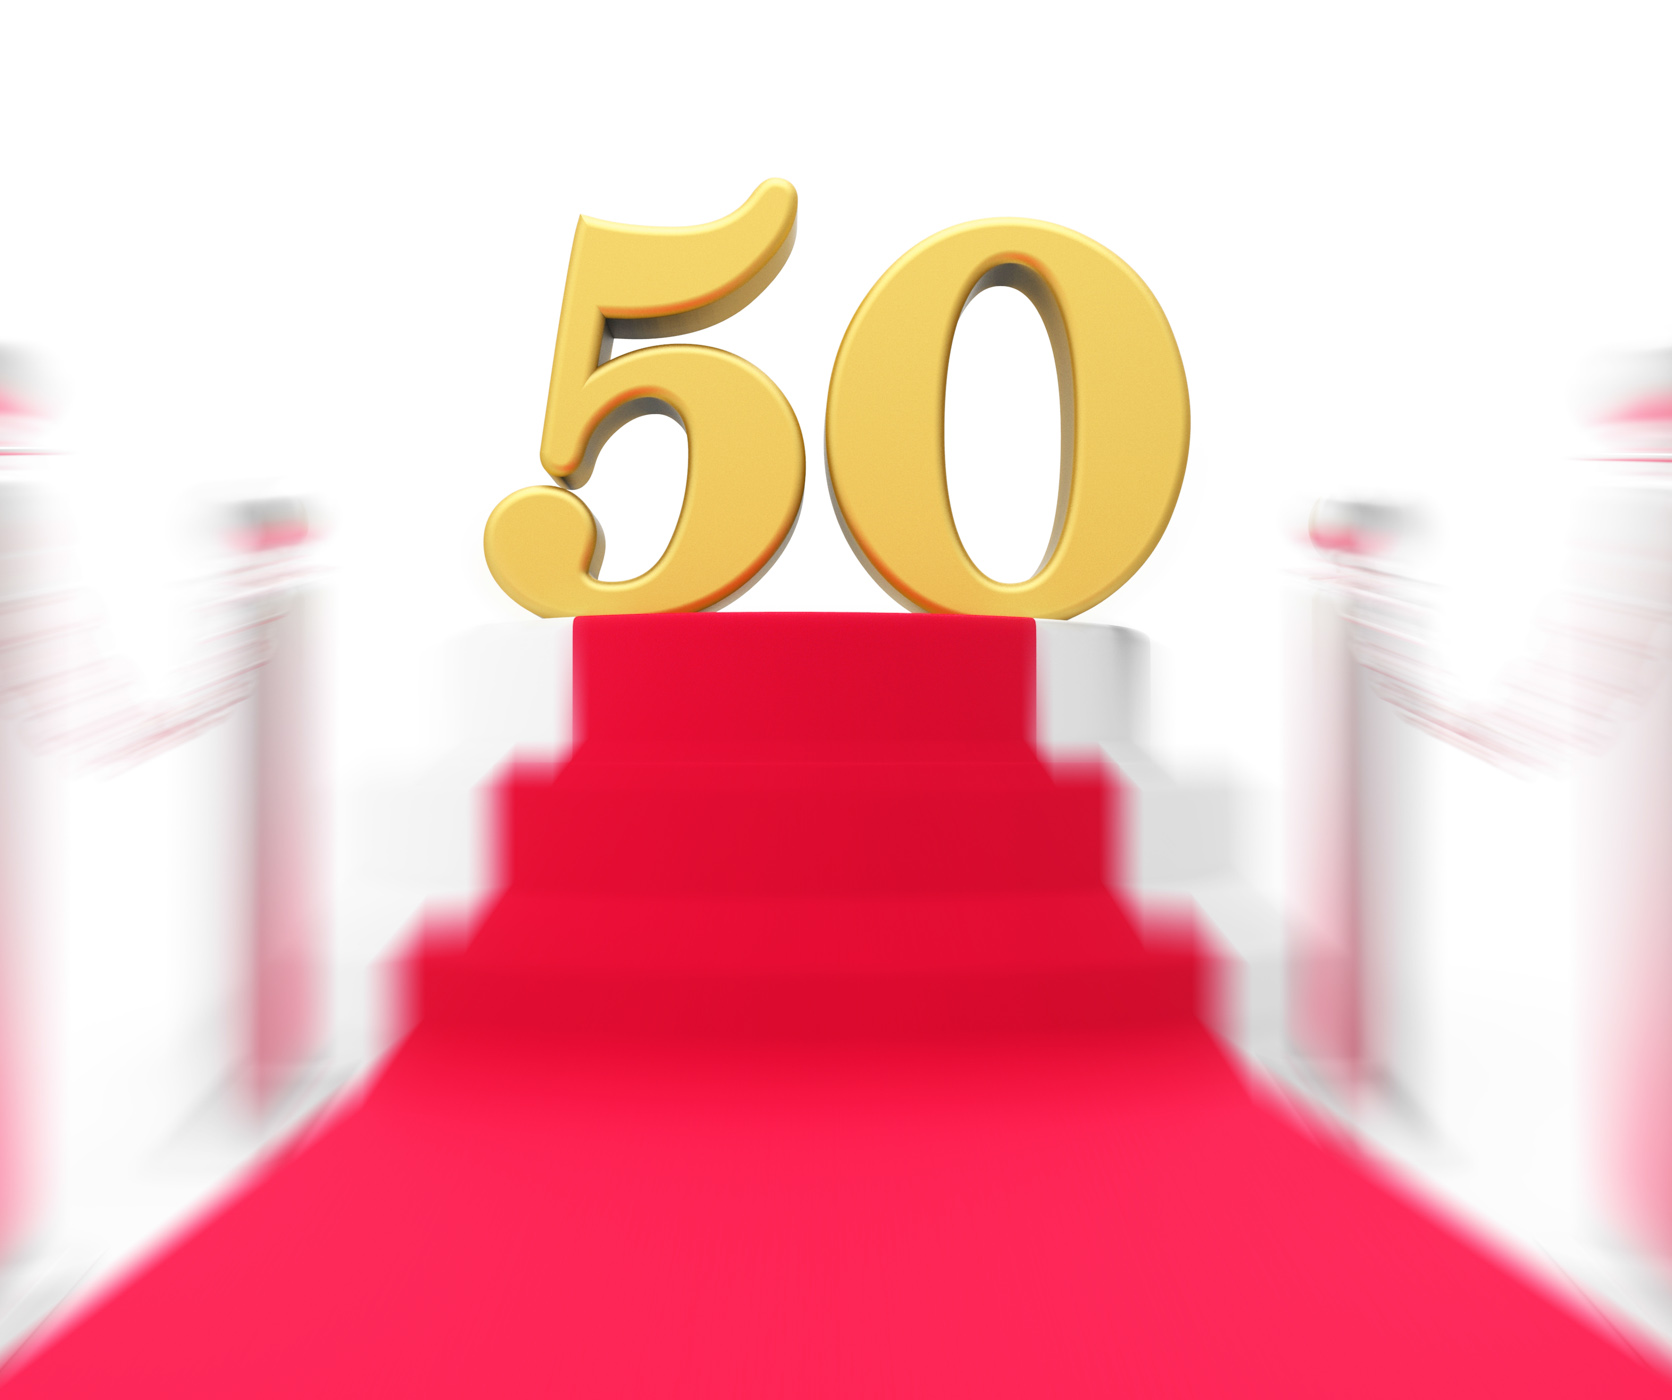 Golden fifty on red carpet displays fiftieth cinema anniversary or rem photo